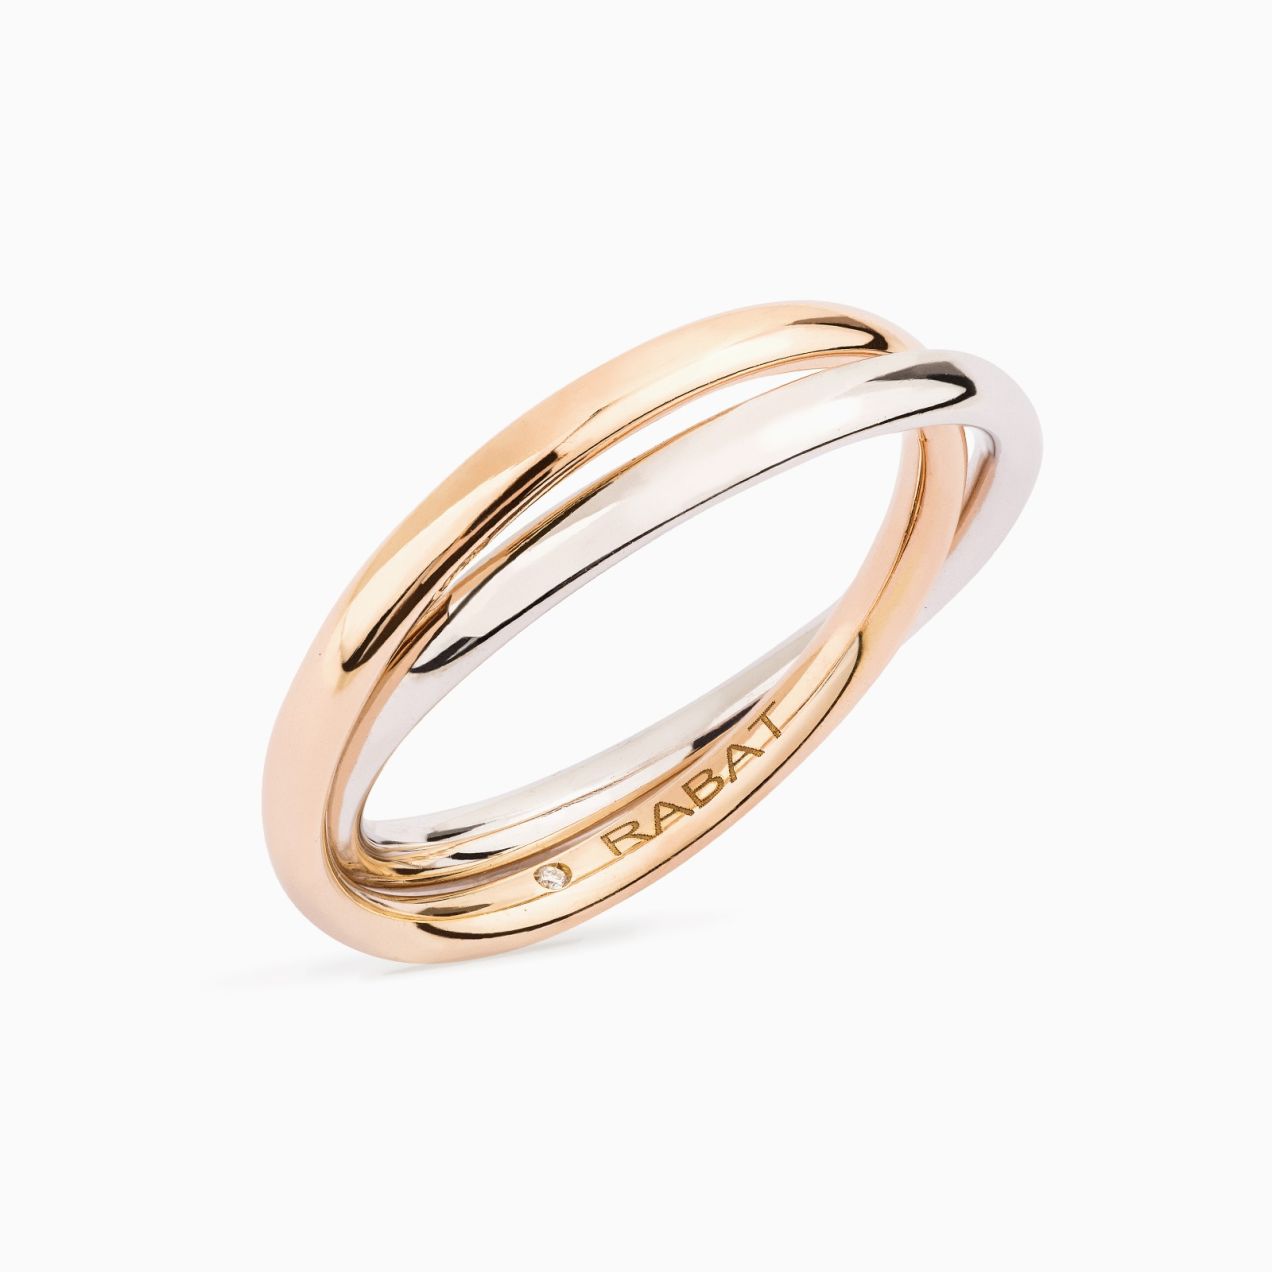 You and Me wedding band in rose and white gold